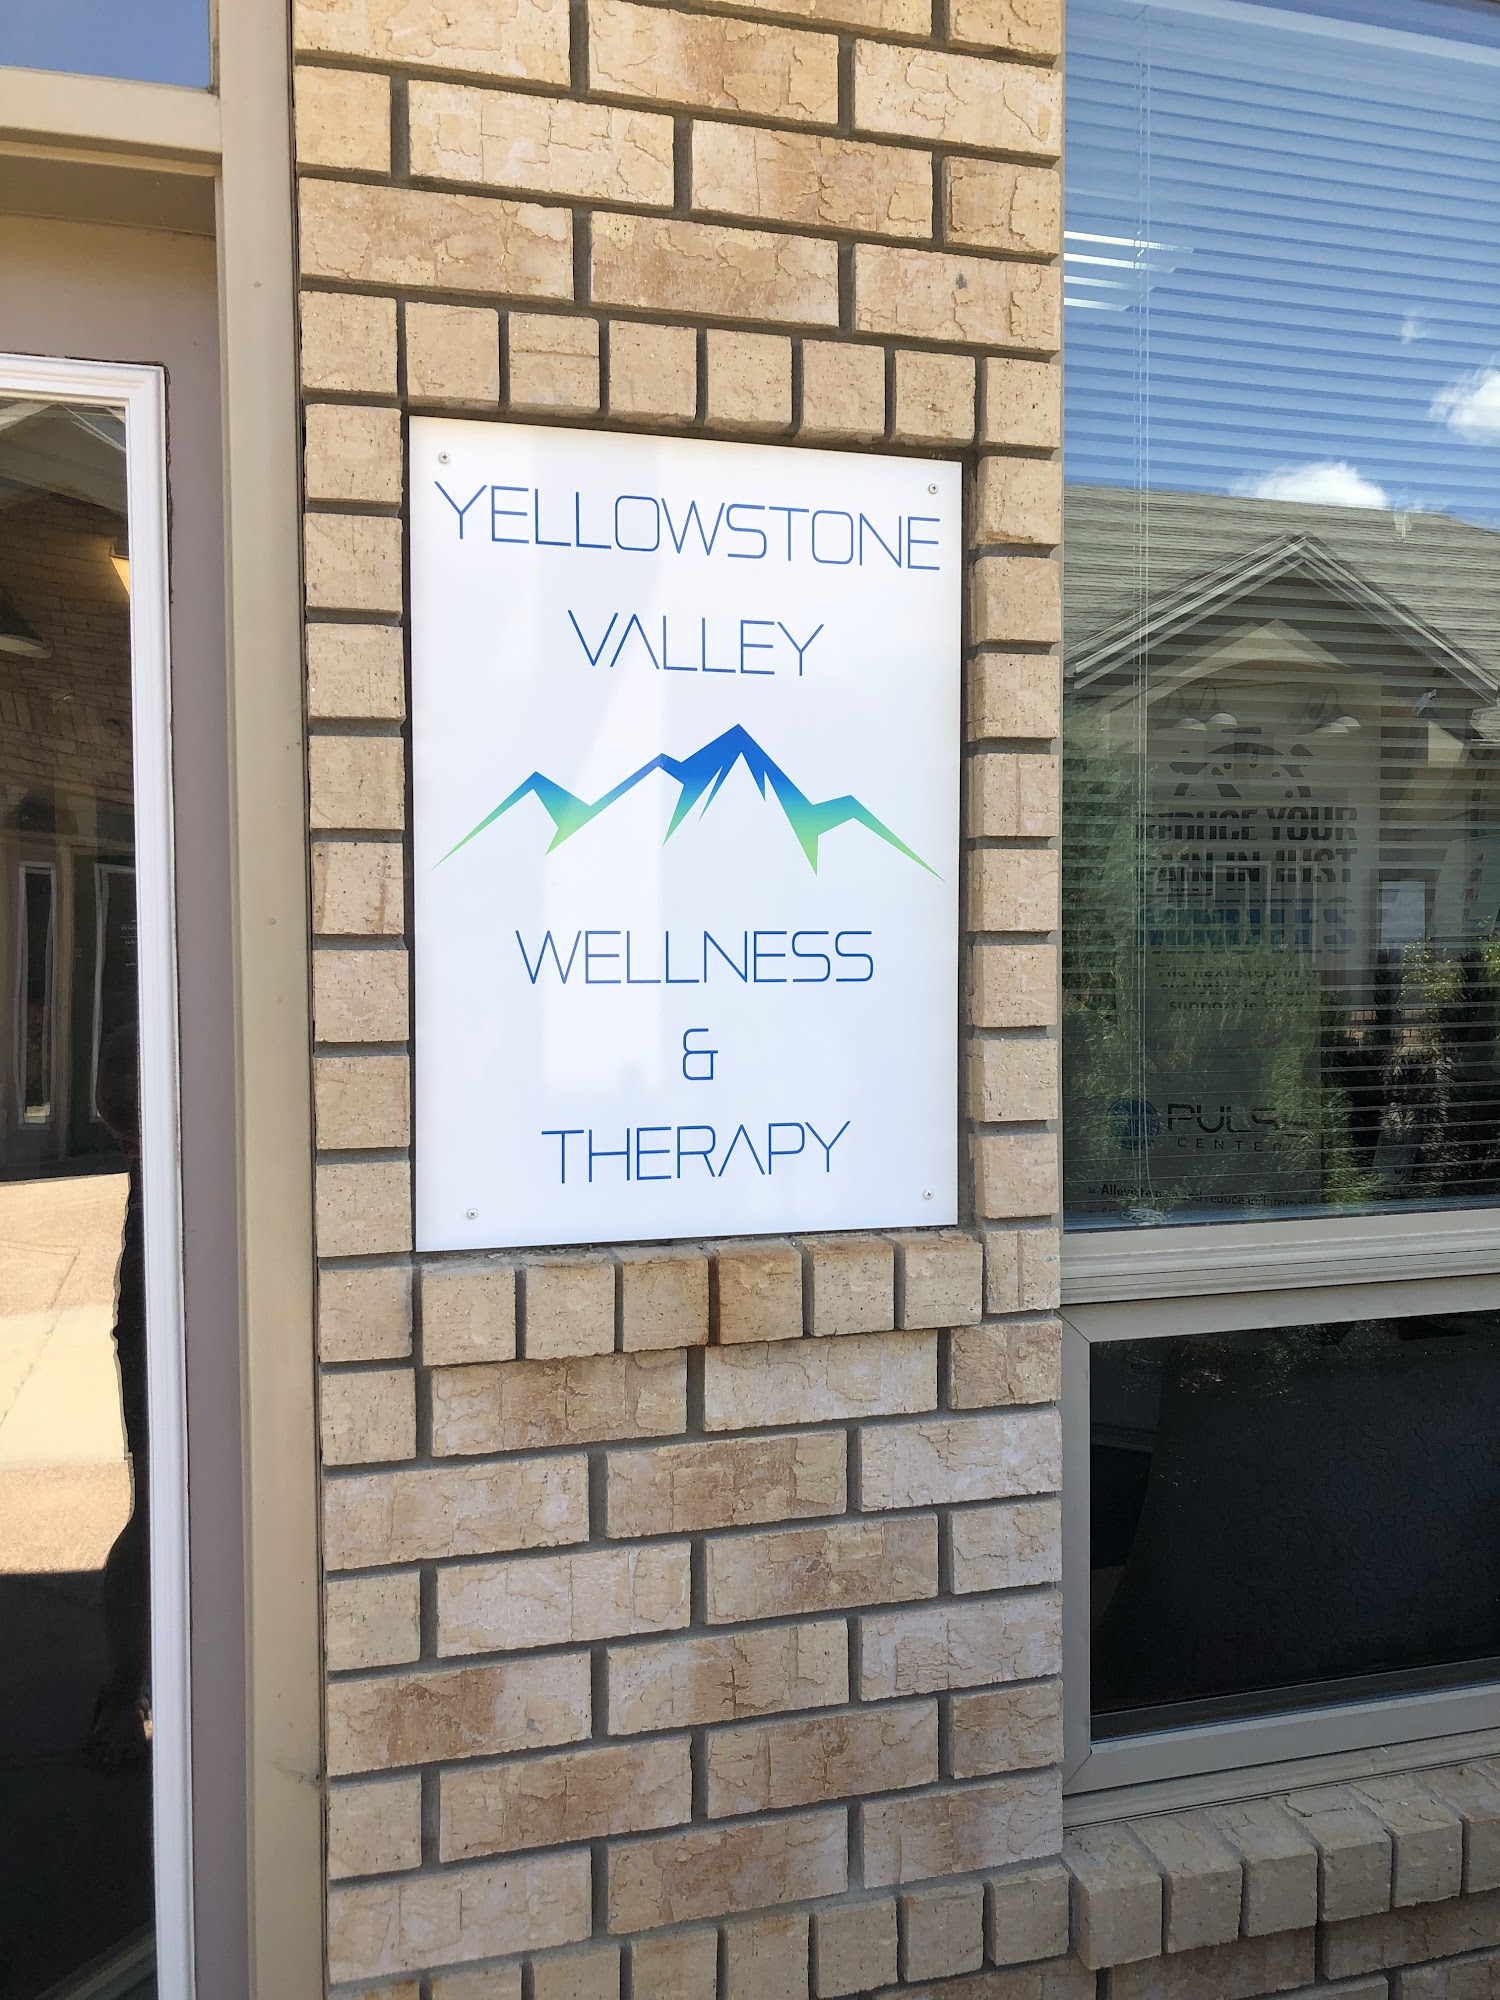 Yellowstone Valley Wellness & Therapy